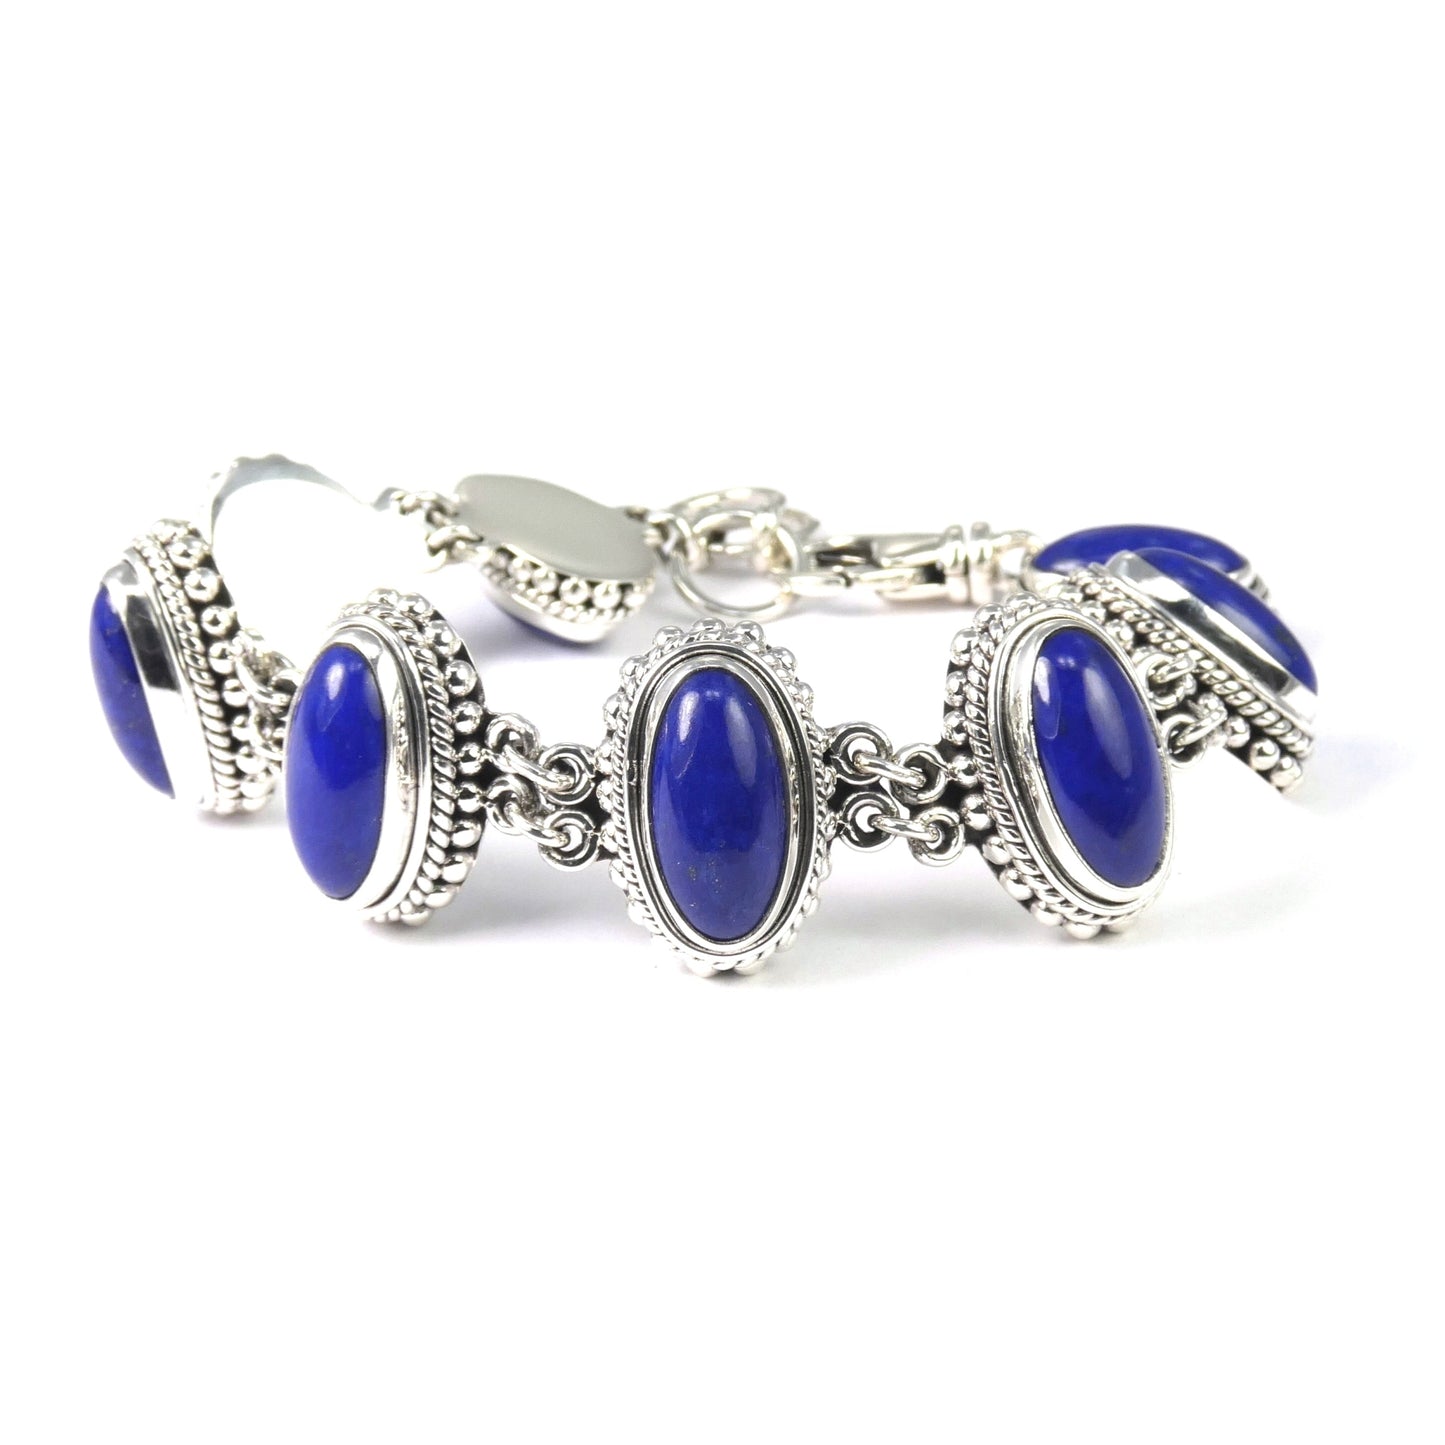 Silver link bracelet with eight blue cabochon lapis stones set in beaded links.